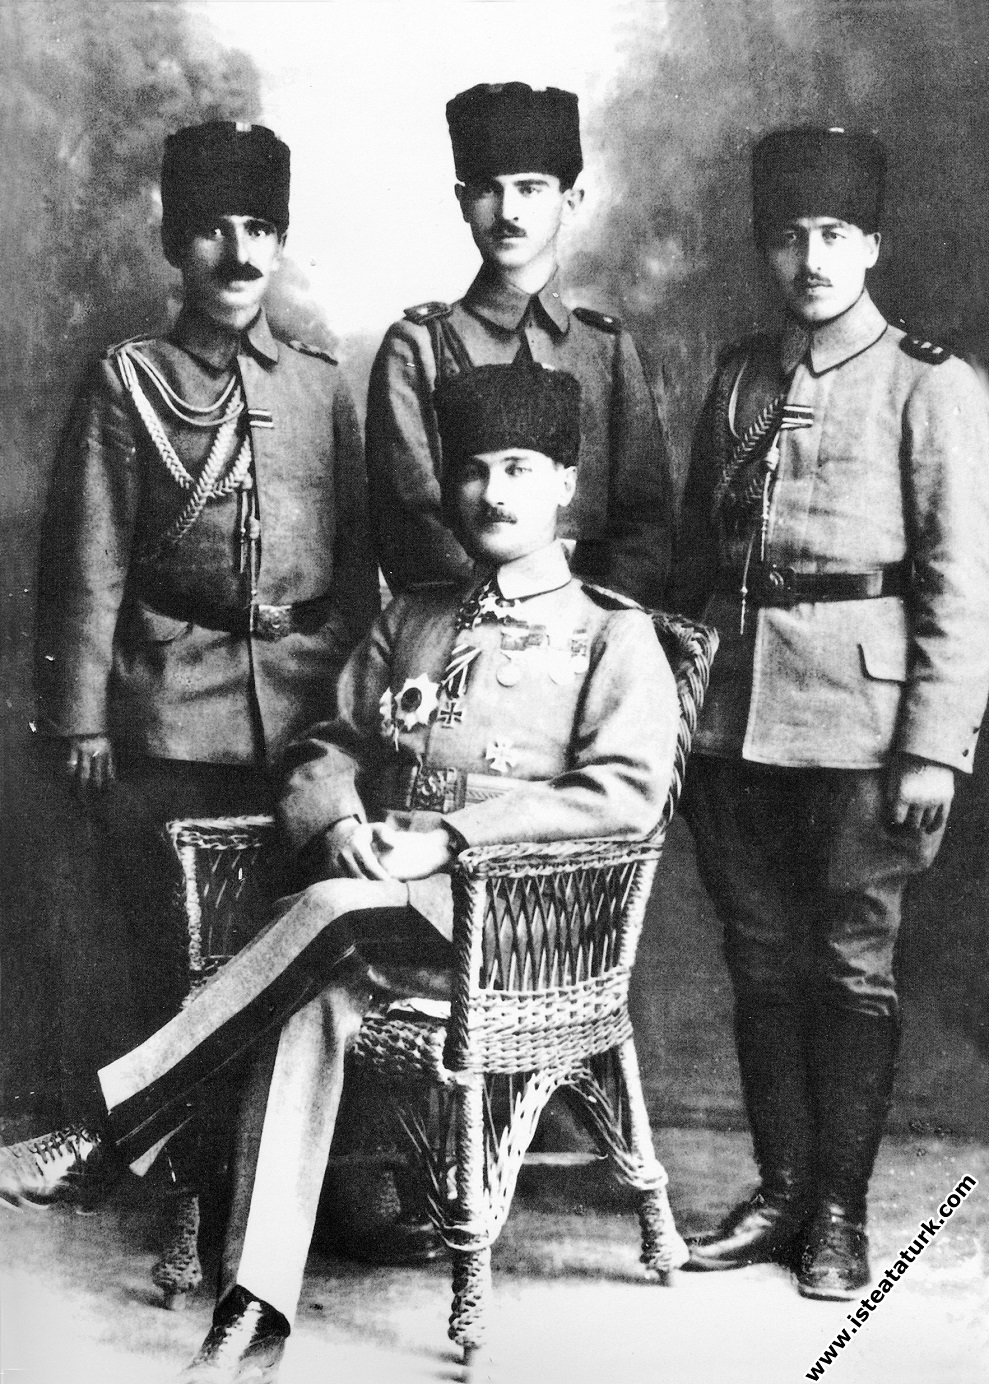 While he was the Commander of the Lightning Armies, he was in Aleppo with his aides. (1917)